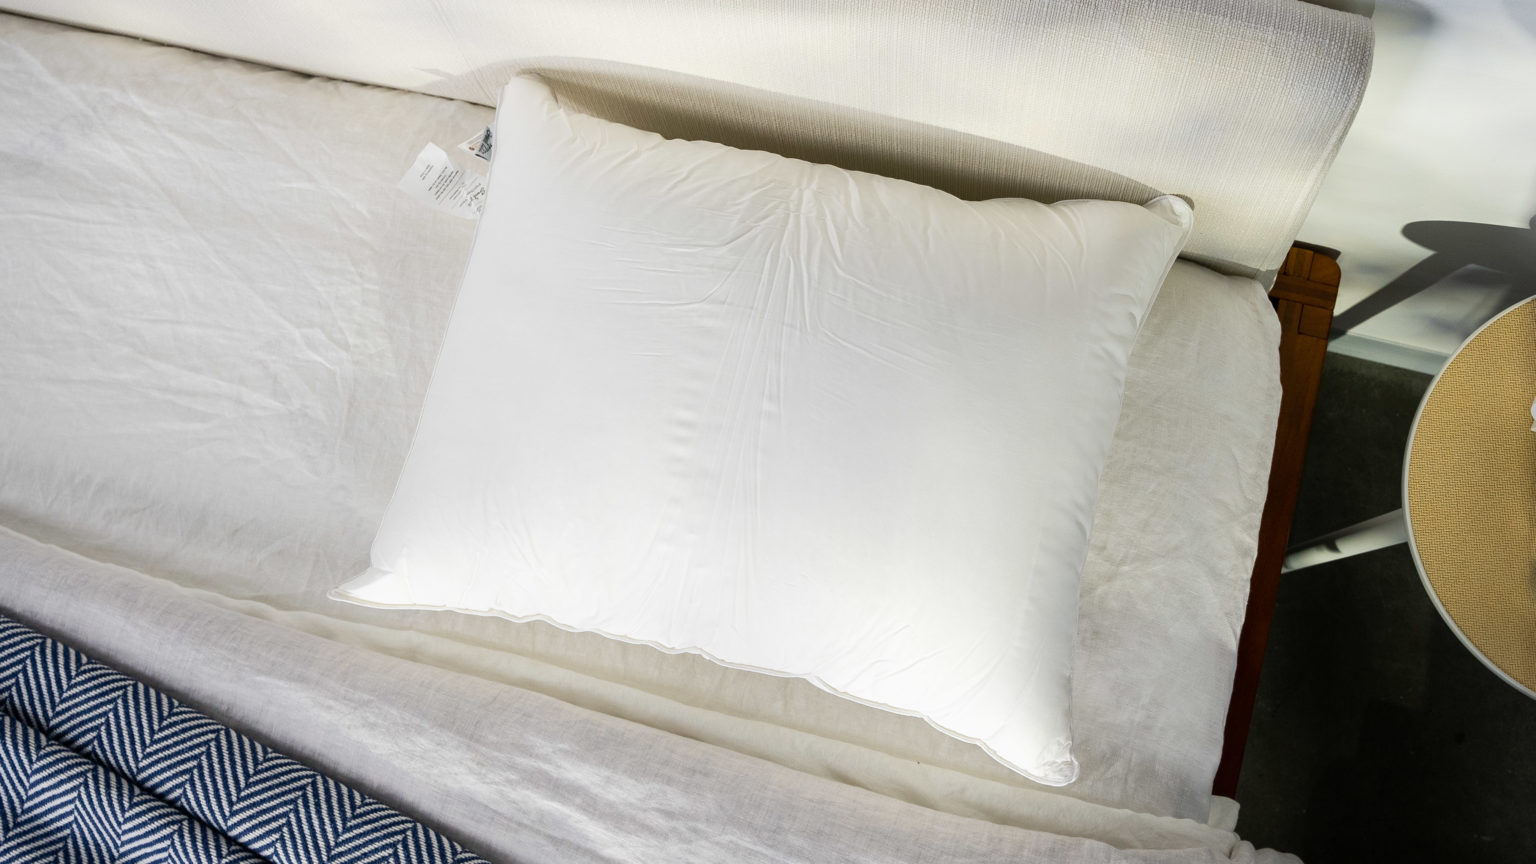 10 Best Pillows for Side Sleepers for the Support Your Neck and Shoulders  Have Been Craving